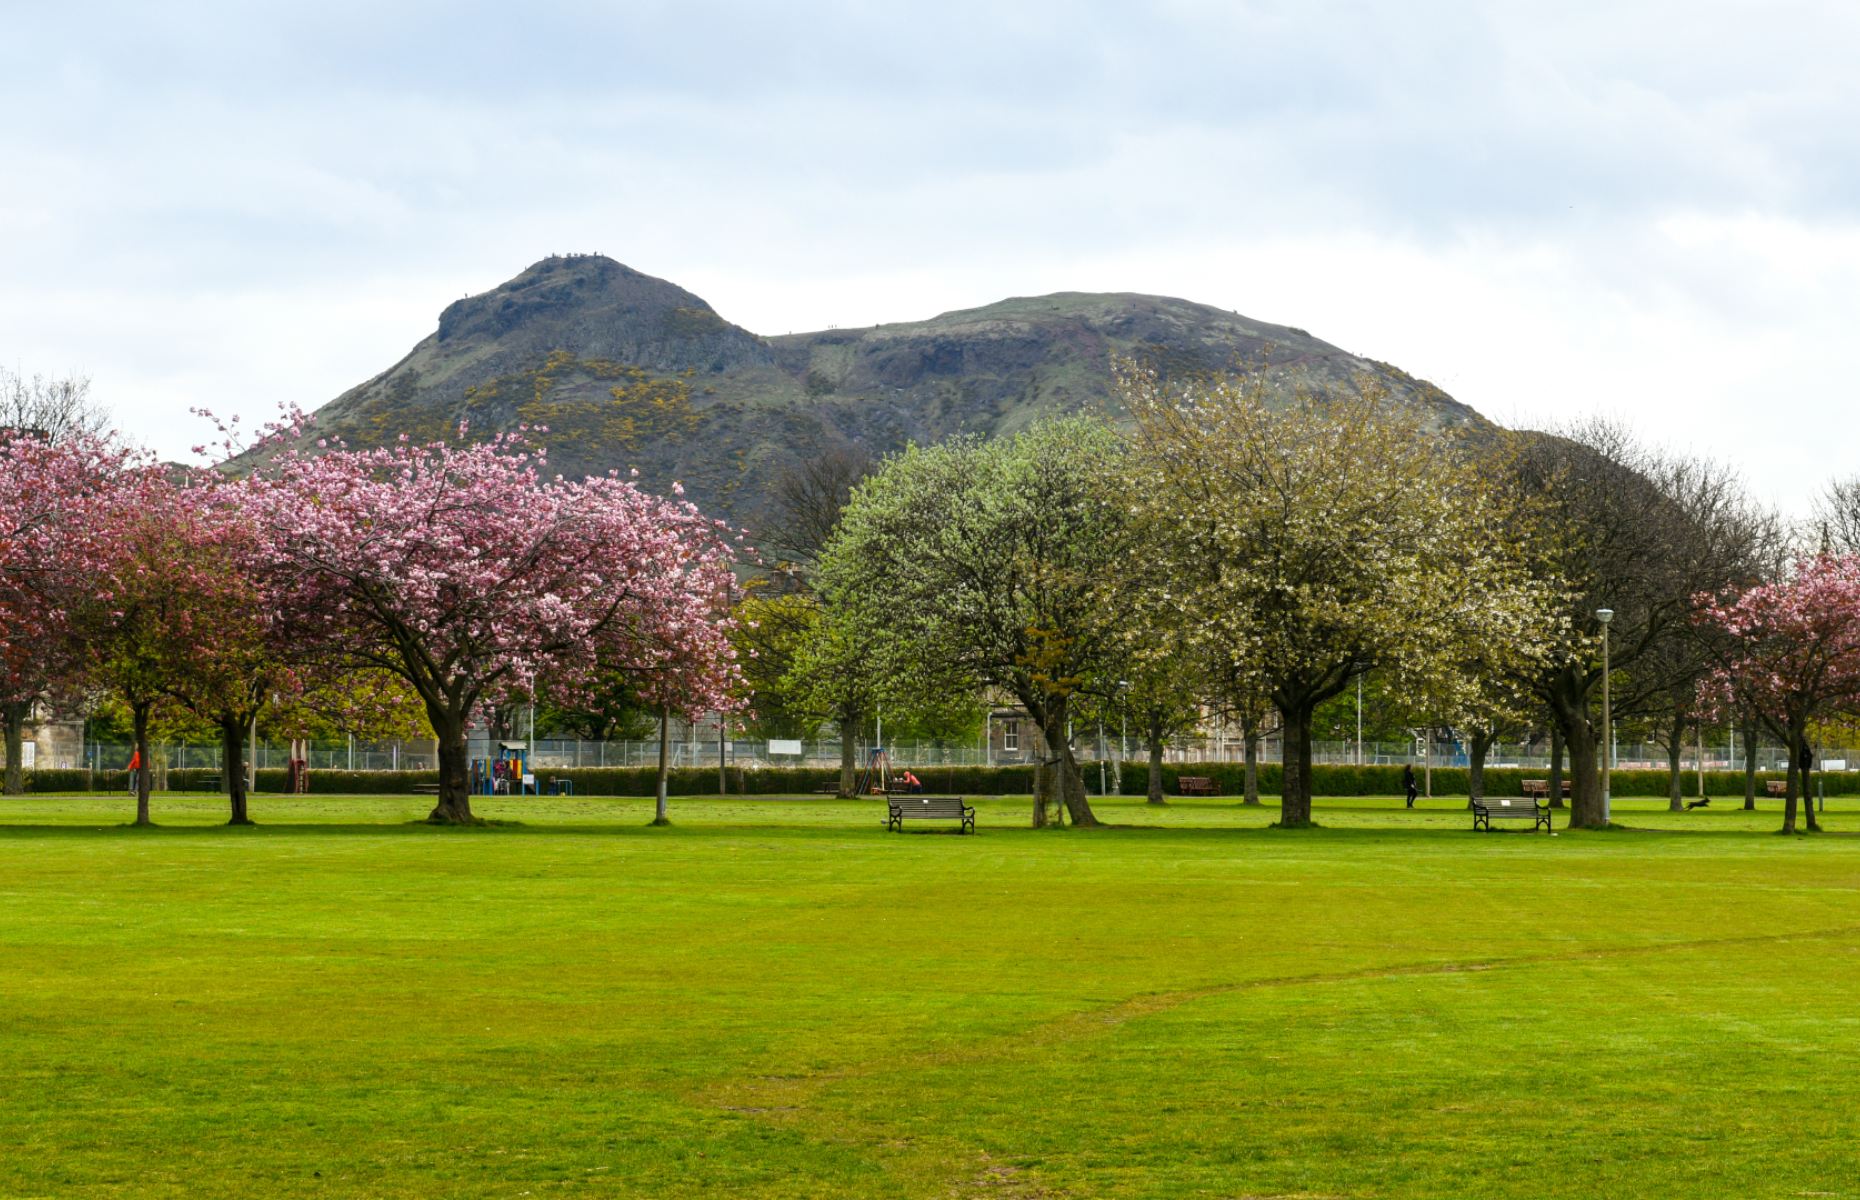 The Meadows (Image: ABO PHOTOGRAPHY/Shutterstock)